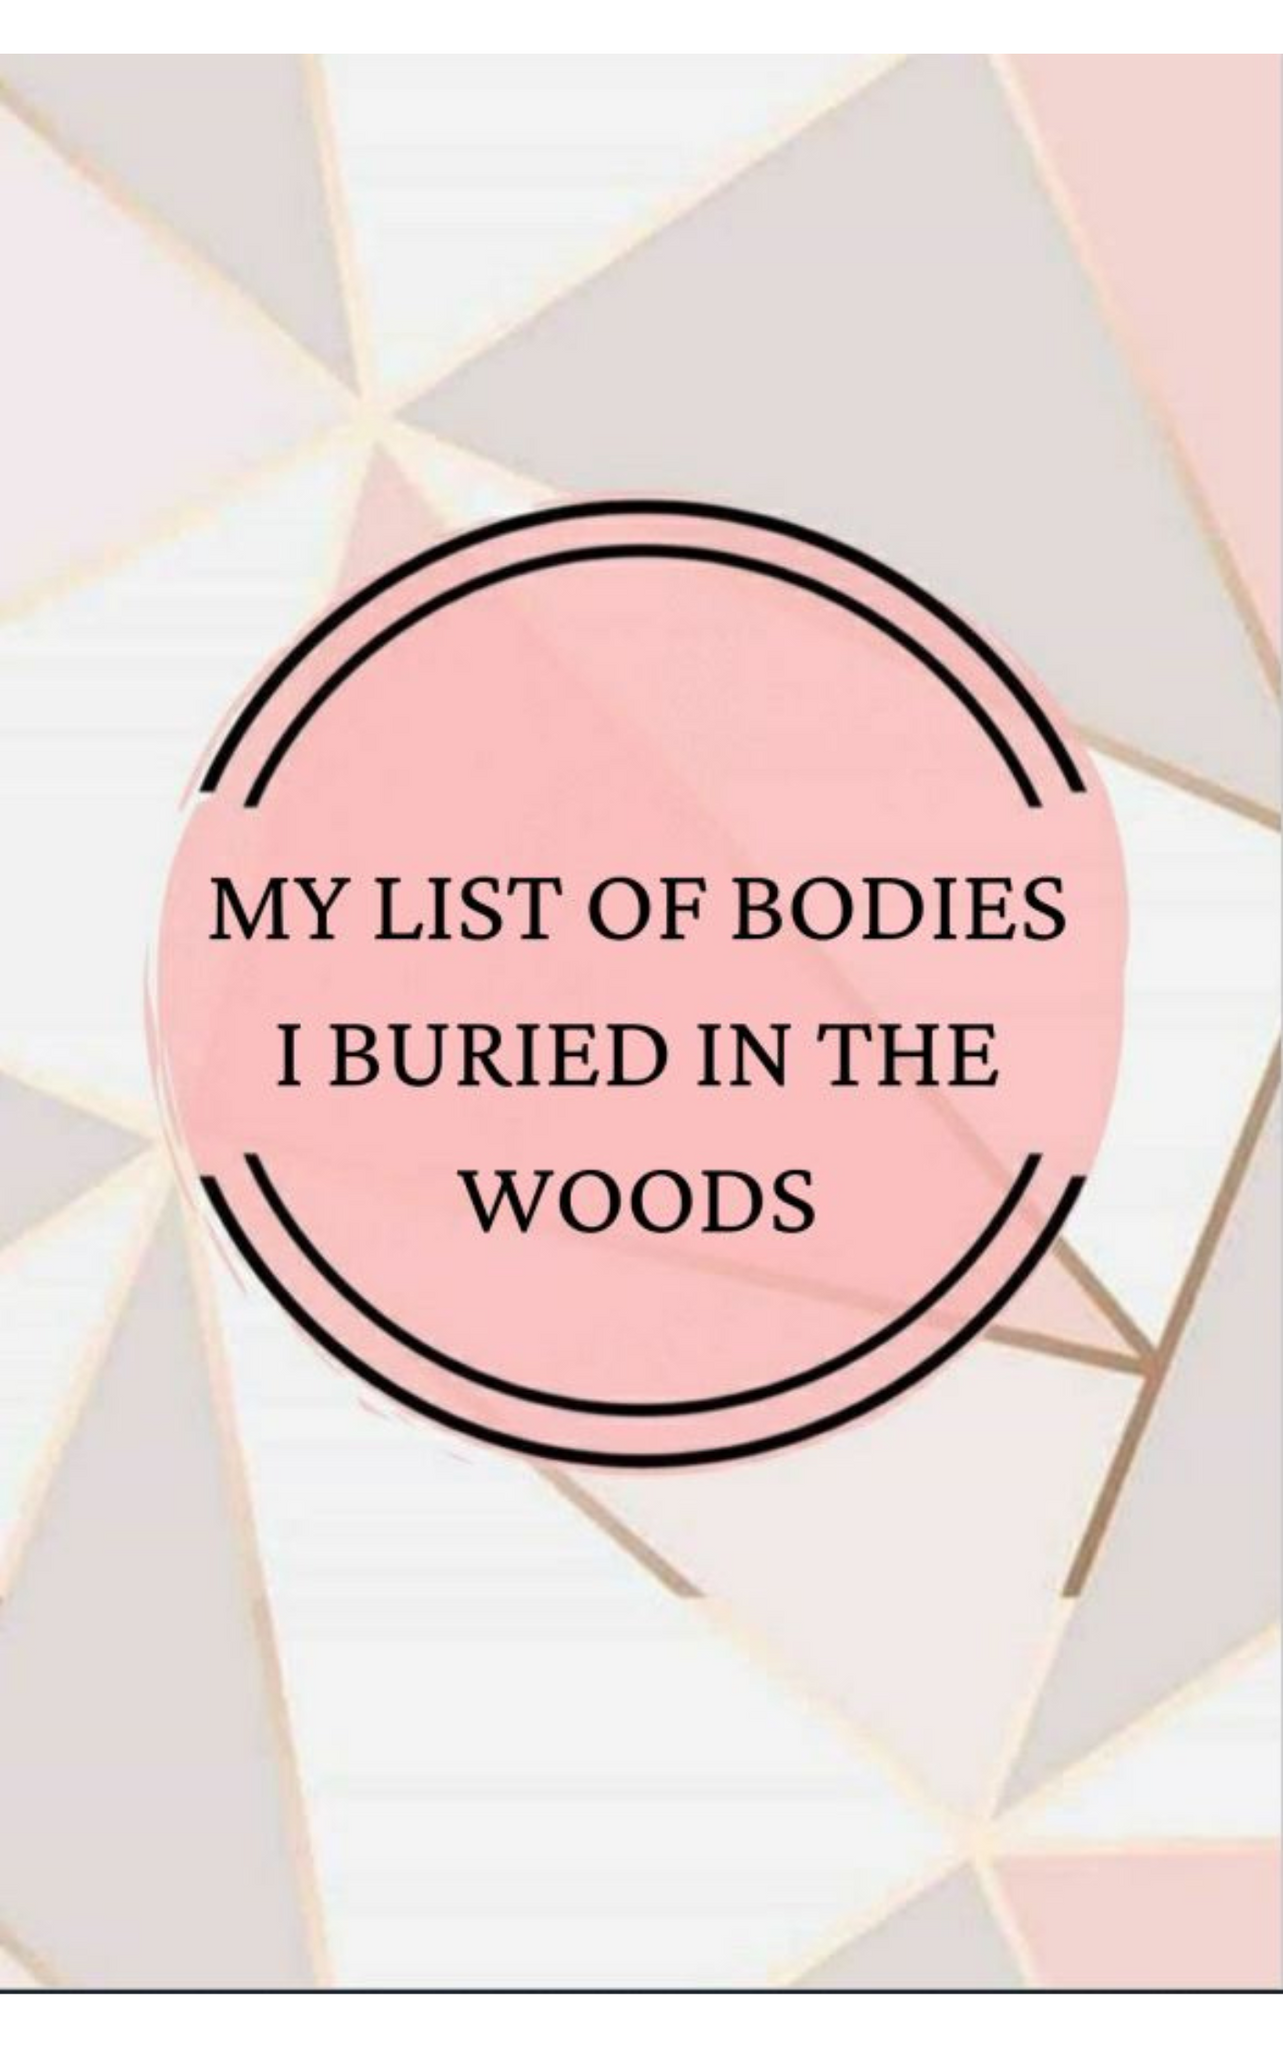 My List of Bodies I Buried in the Woods